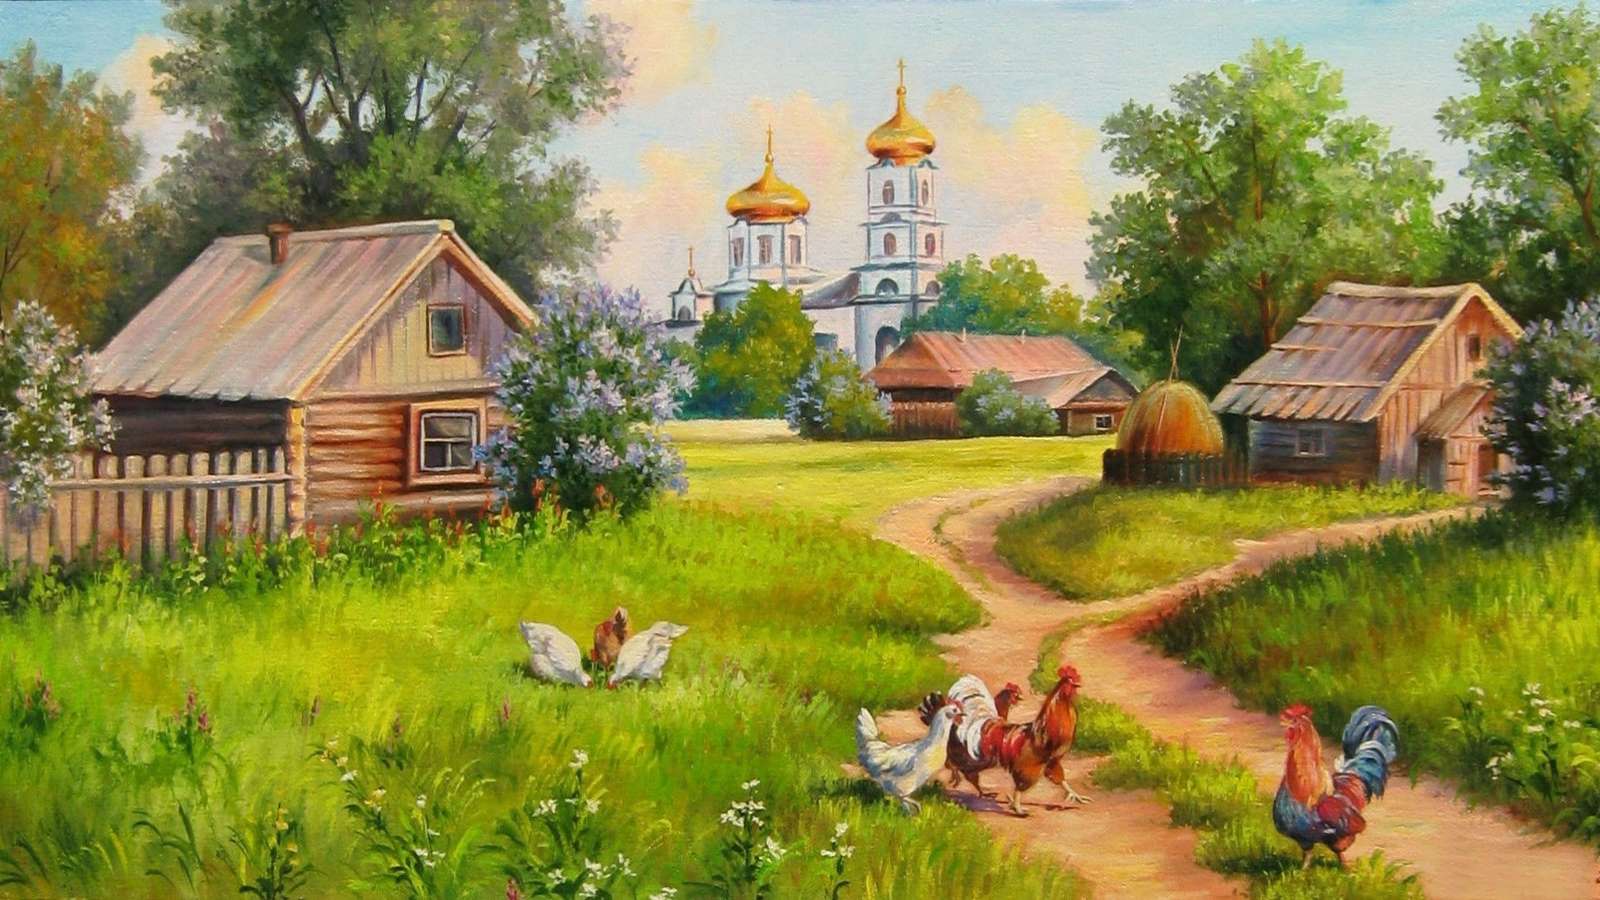 In the Russian village. jigsaw puzzle online